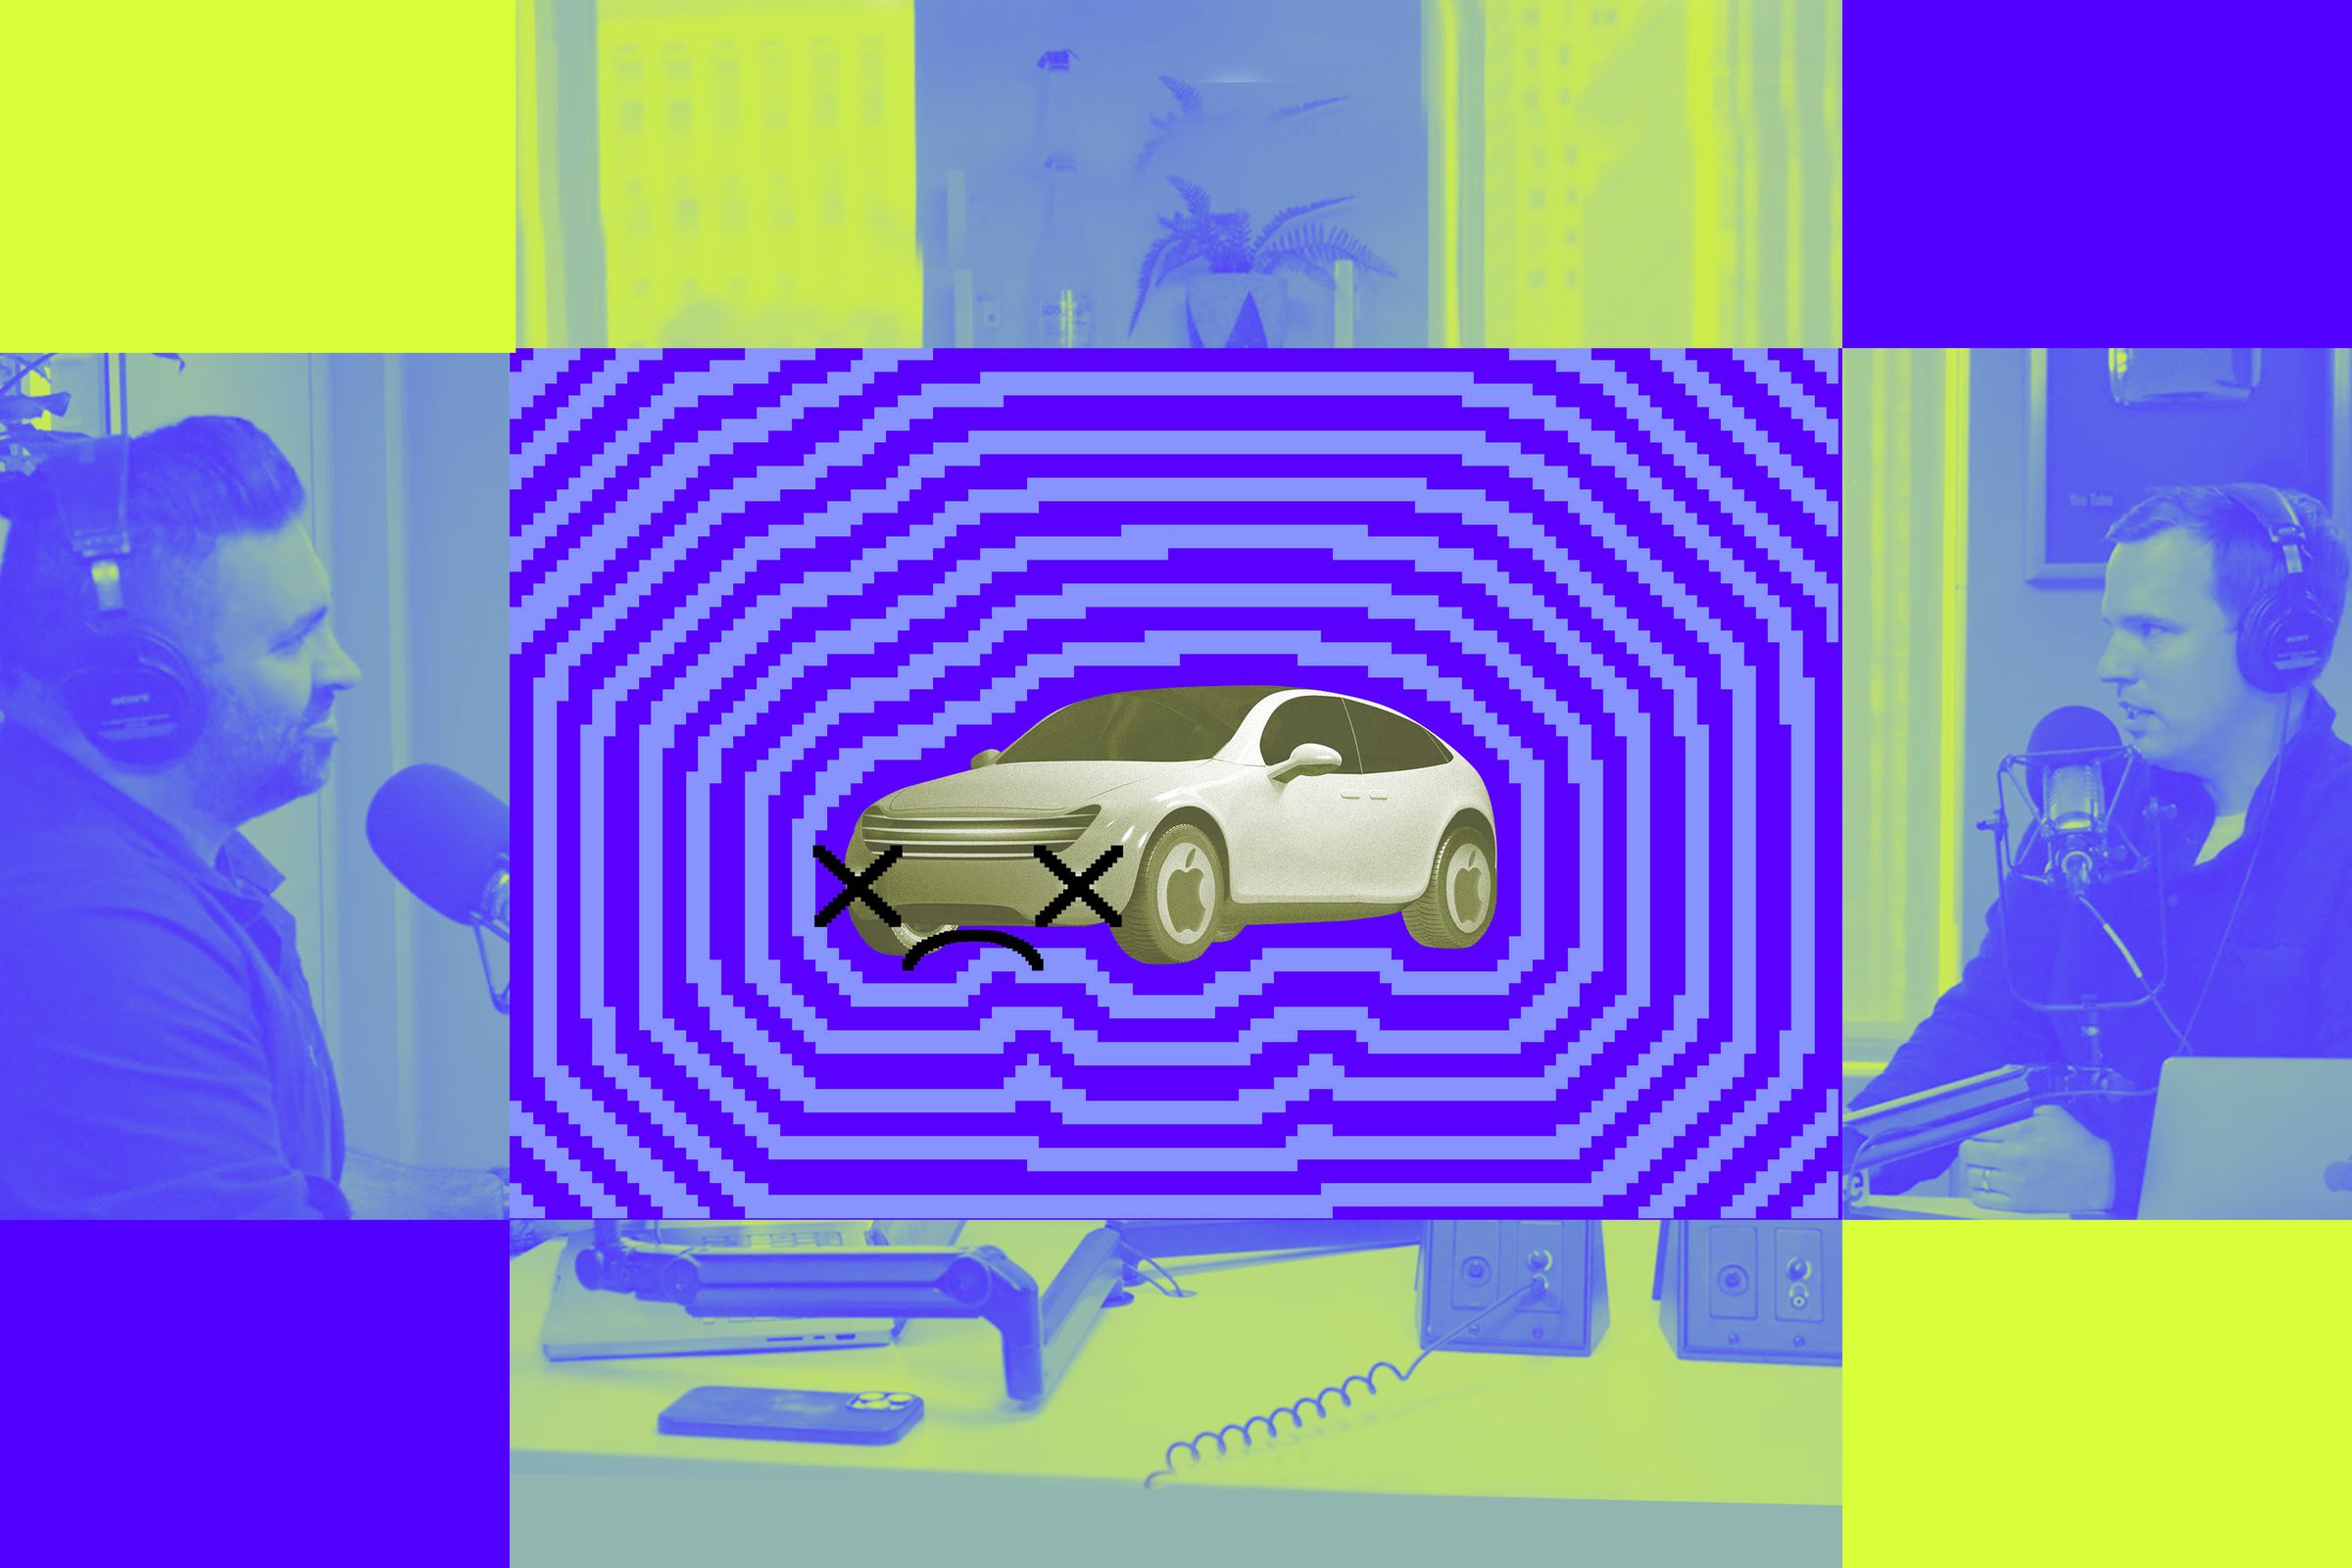 An illustration showing the Apple Car overtop of the Vergecast logo.